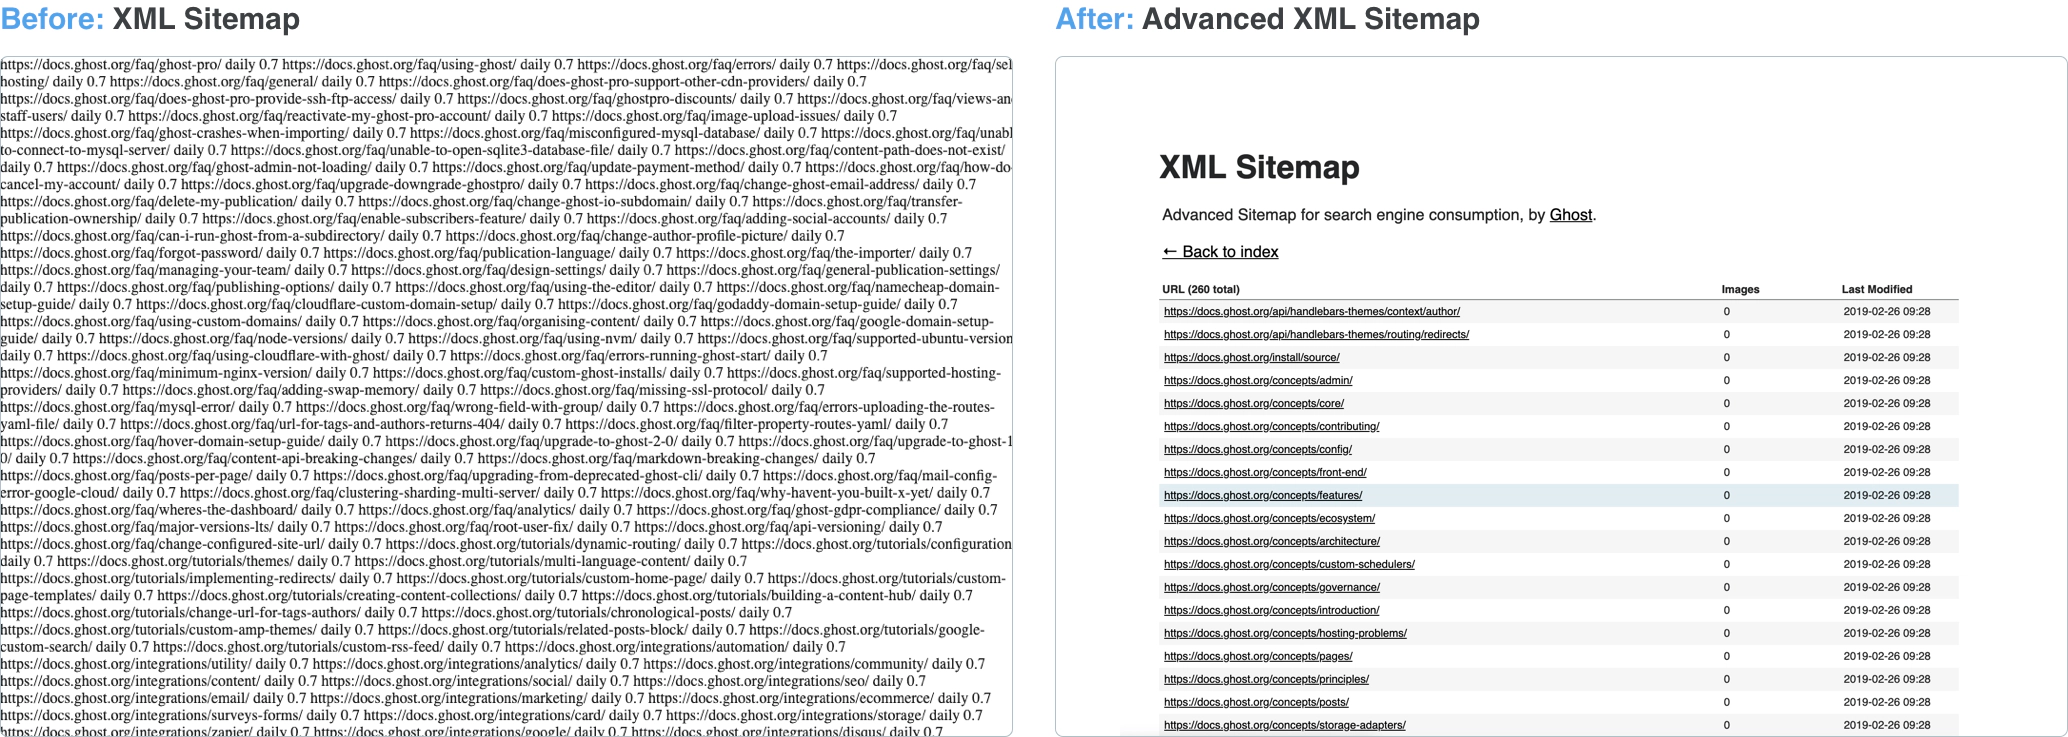 Screenshots of an XML sitemap before and after the plugin has been applied